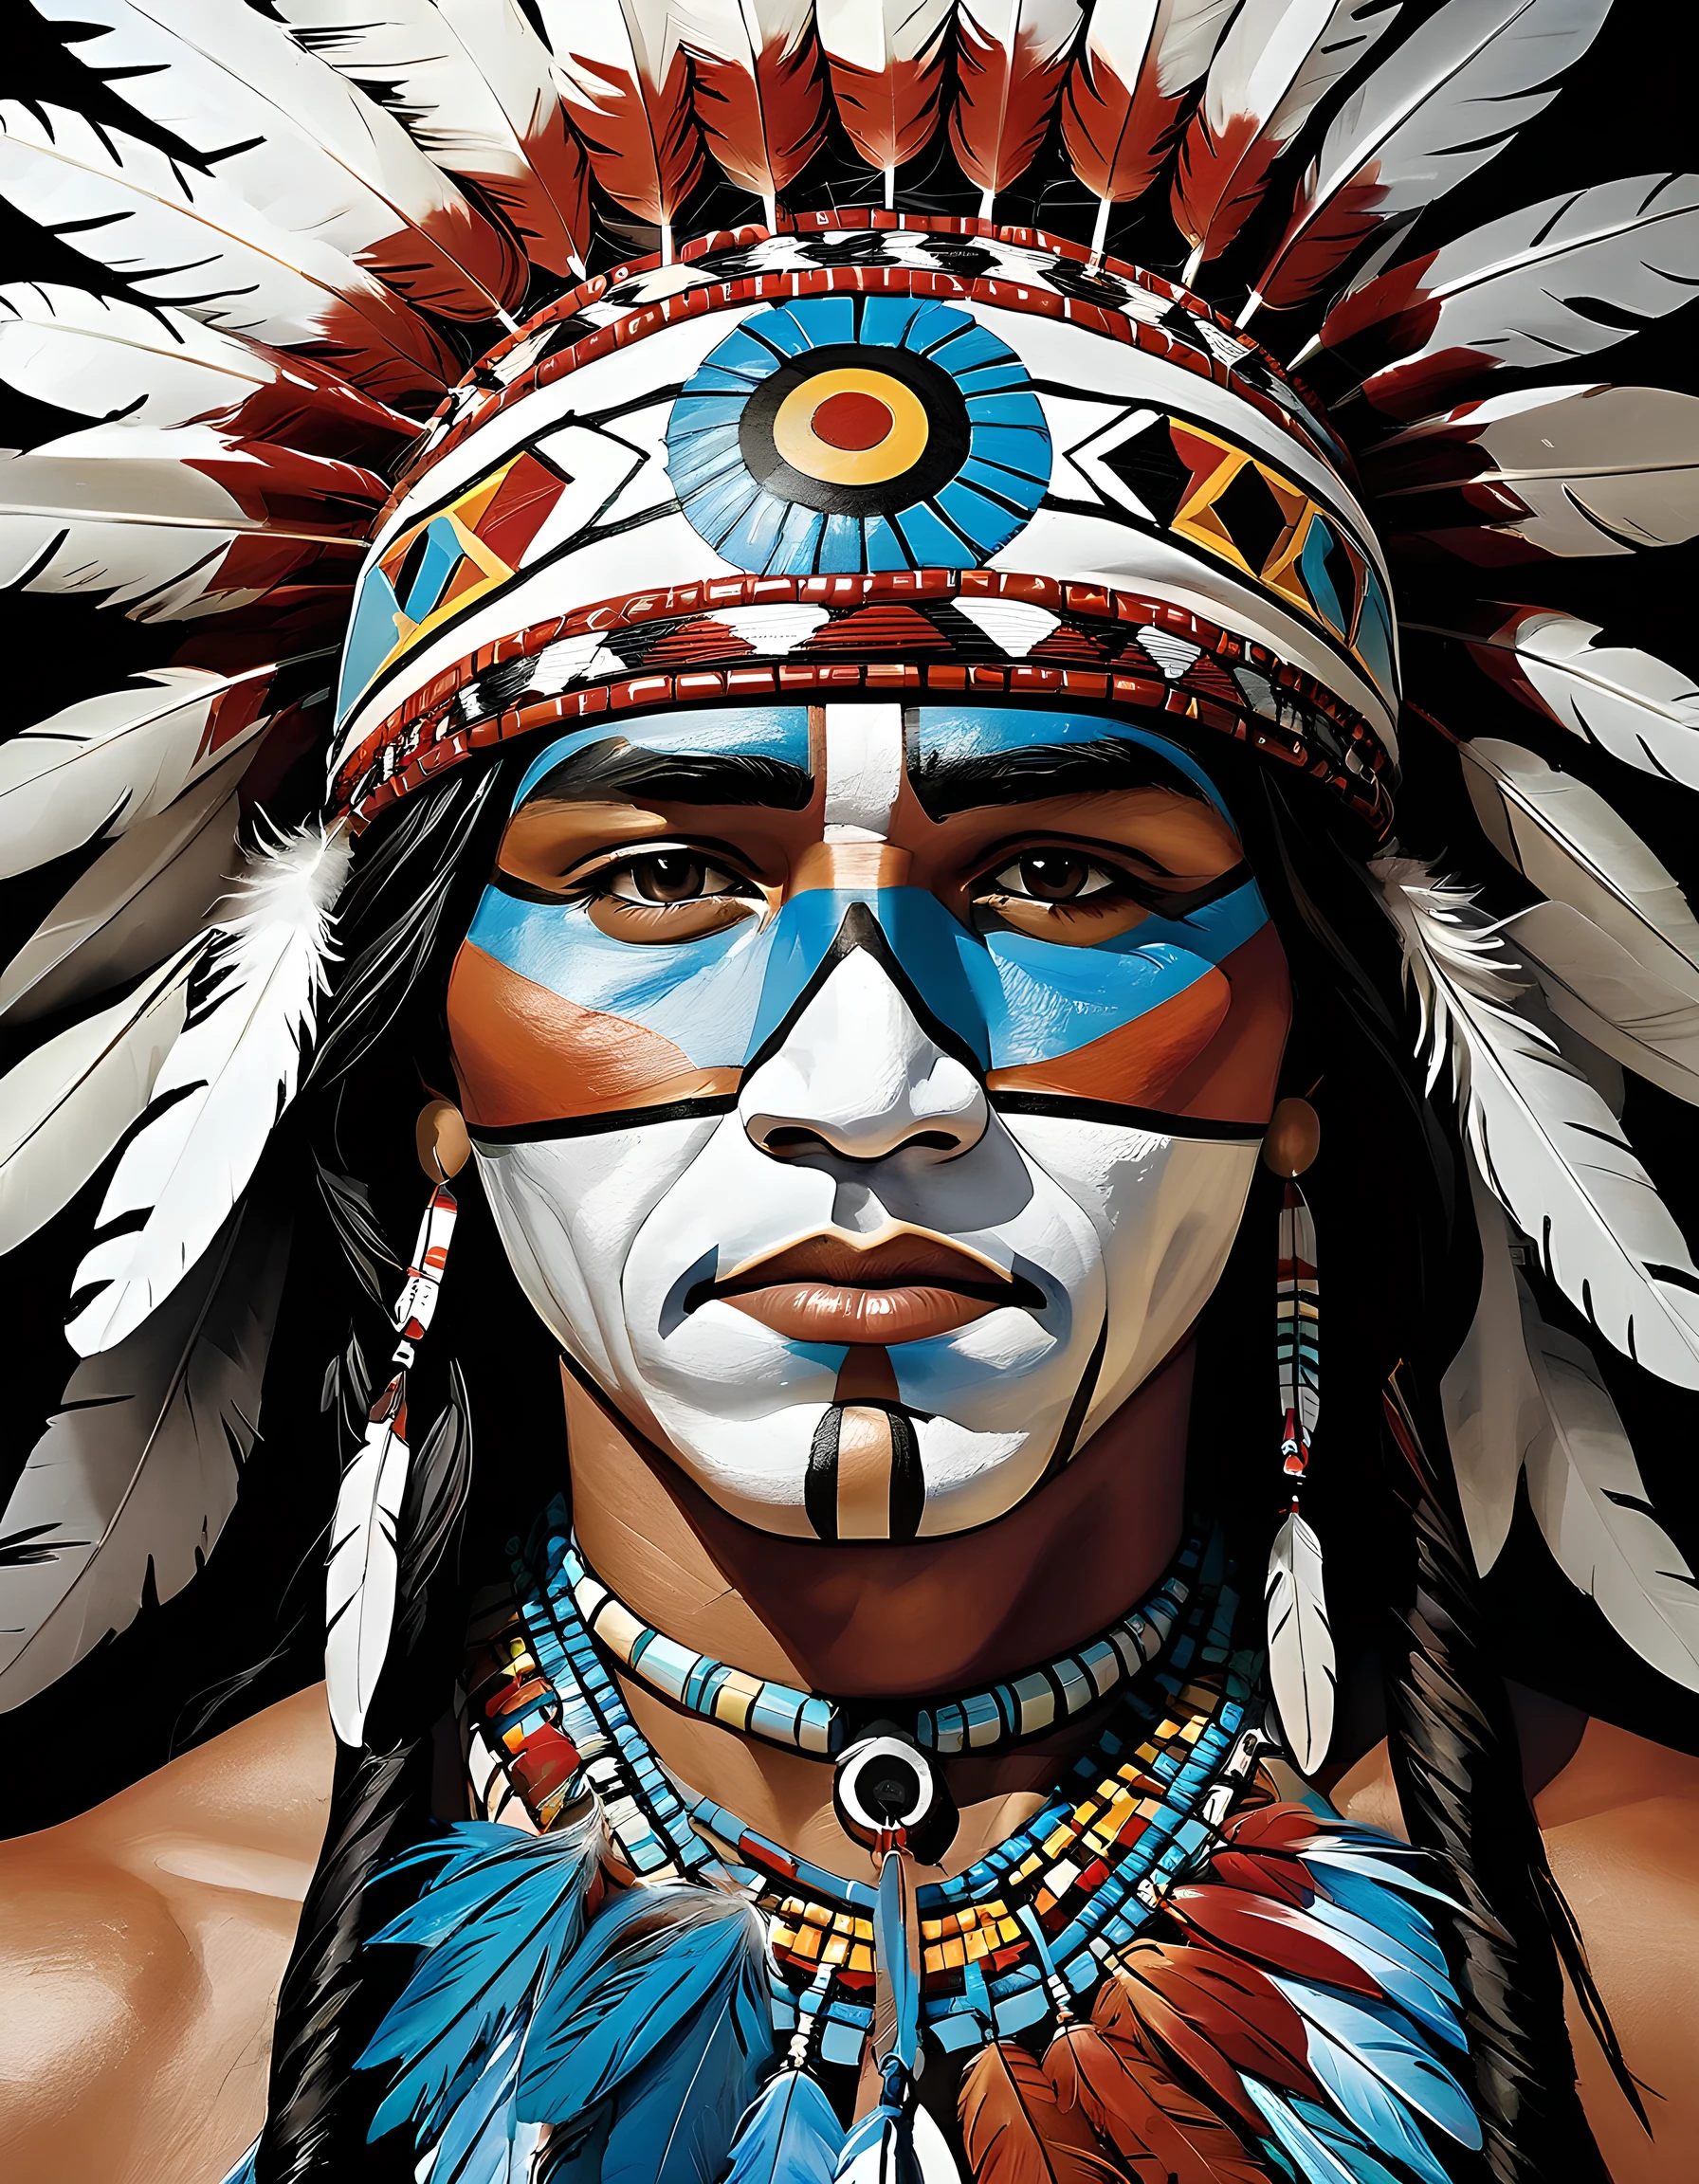 Close-Up of Face, detailed male faces., native American, first nations, Aboriginal, ornaments and accessories made of bird feathers, detailed face painting